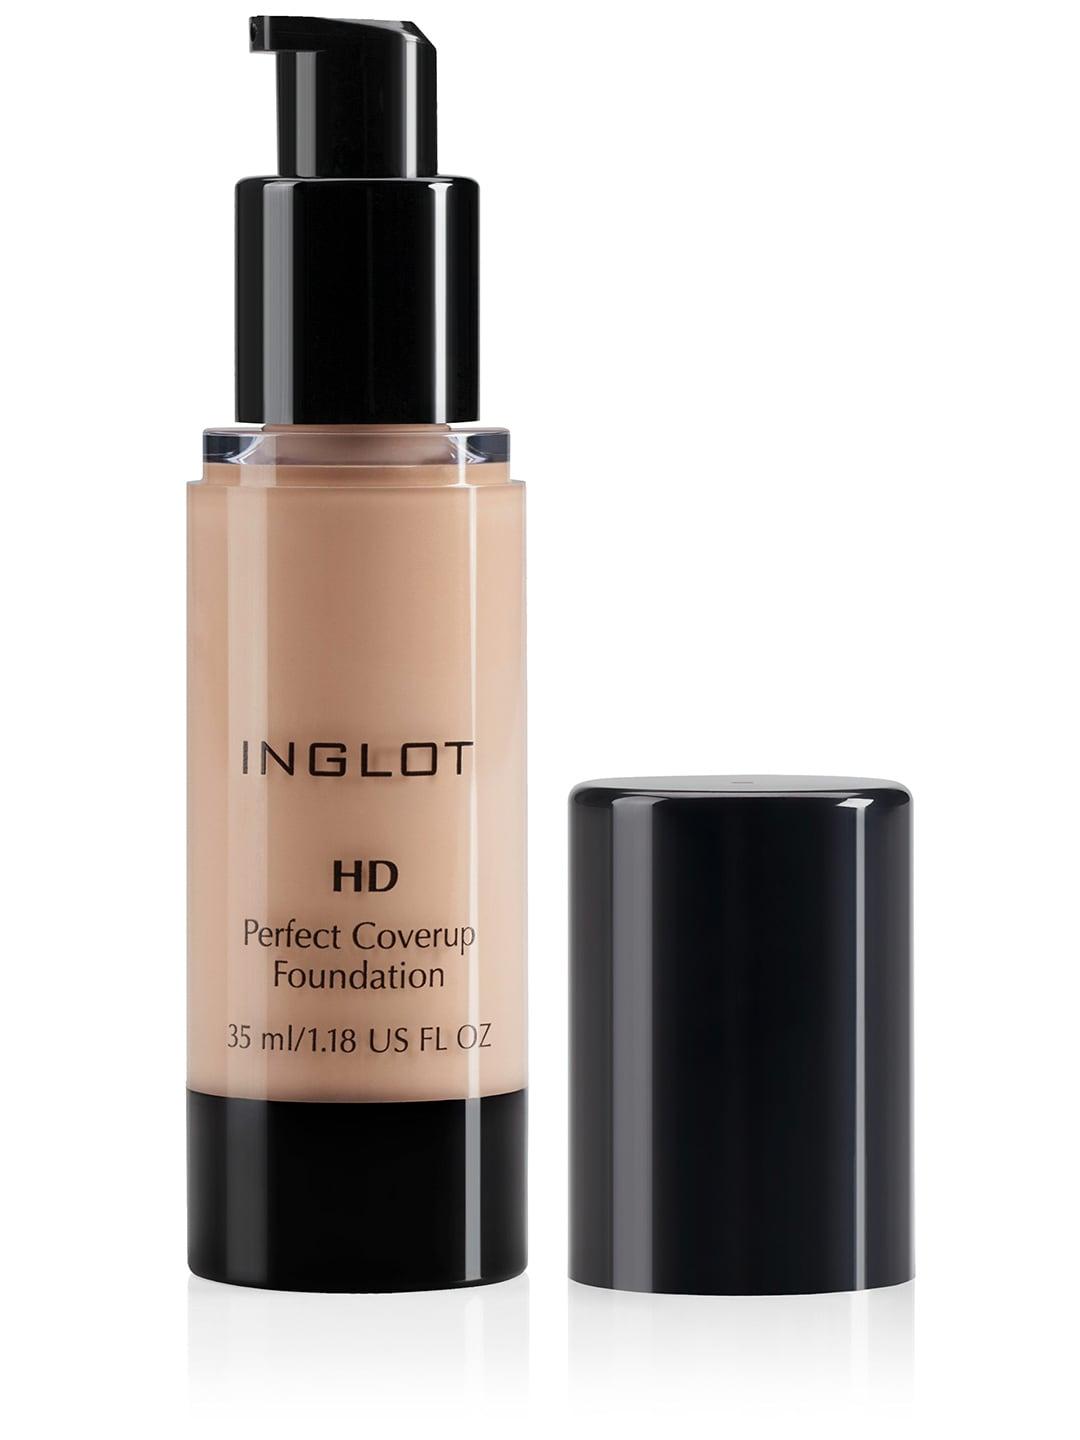 inglot hd perfect coverup foundation 35ml - nude 71